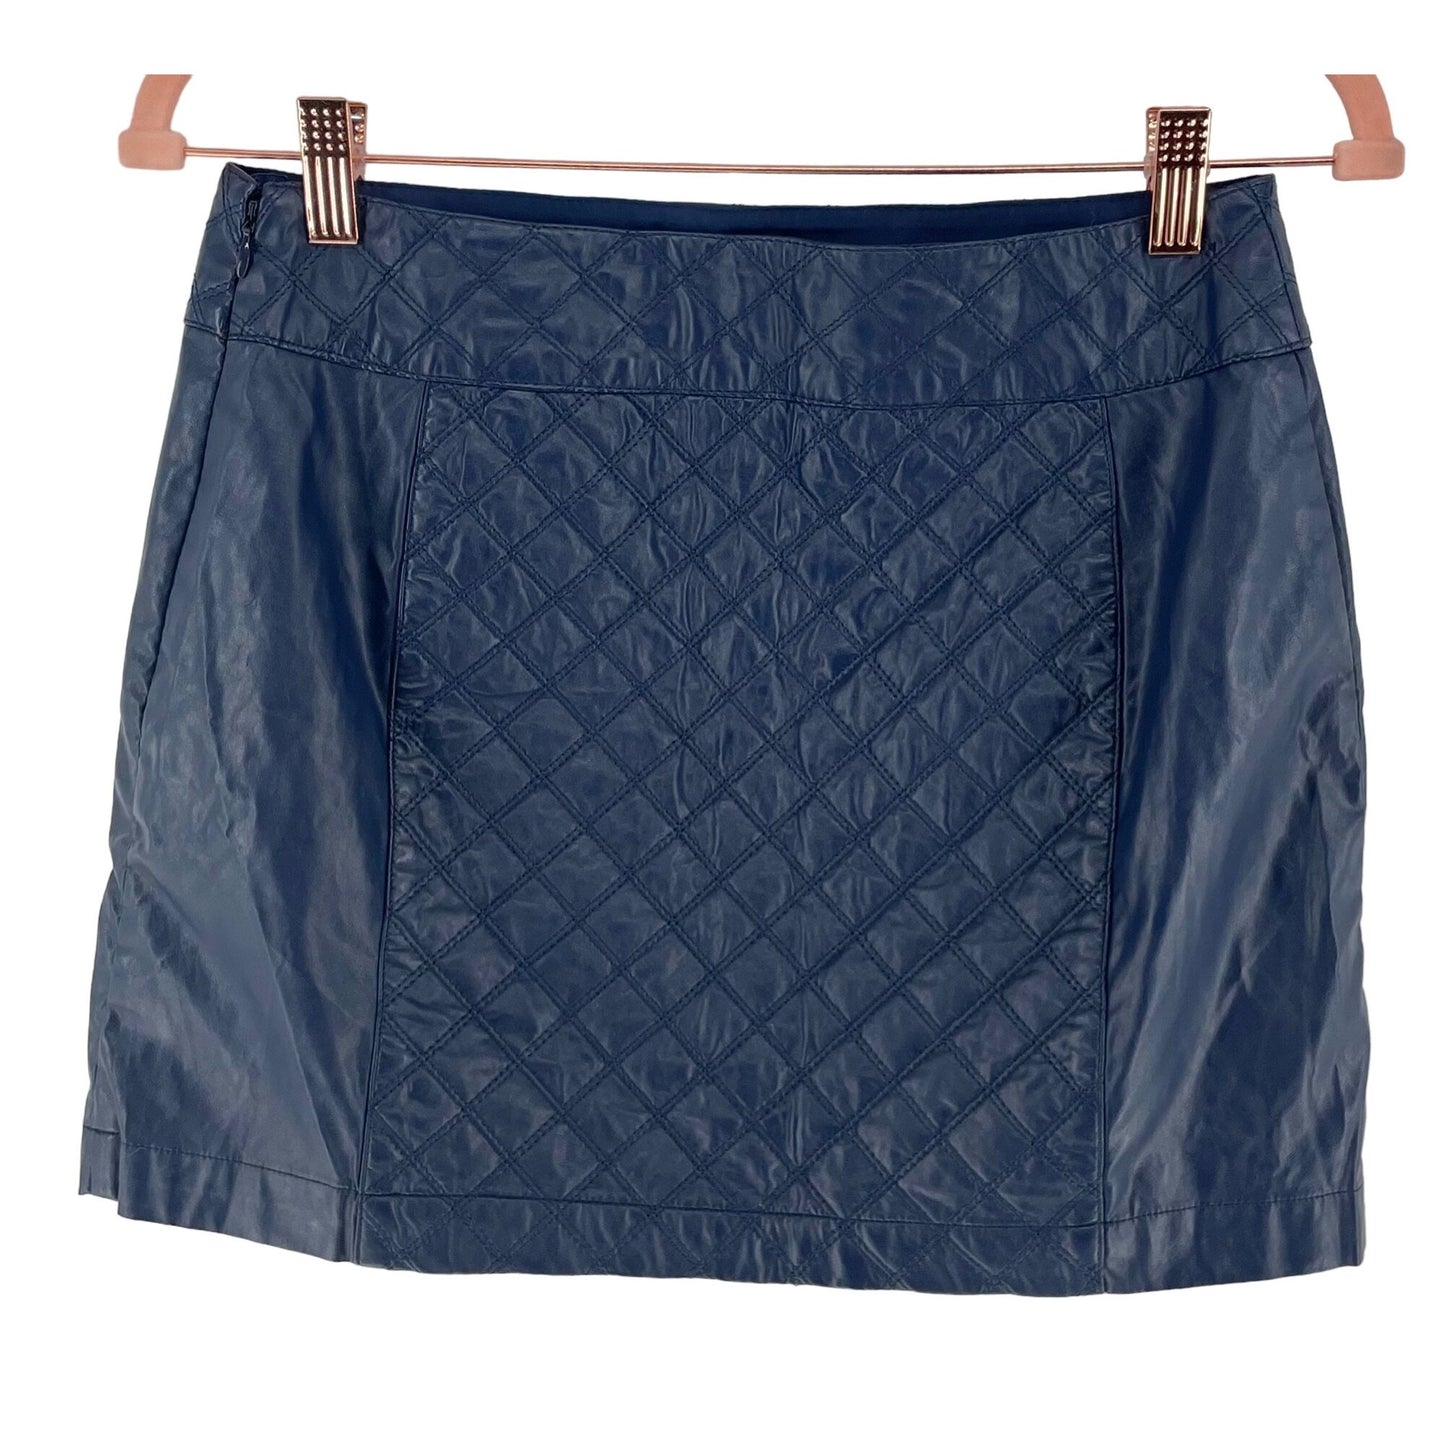 Abercrombie & Fitch Women's Navy Size 2 Quilted Faux Leather Mini Skirt